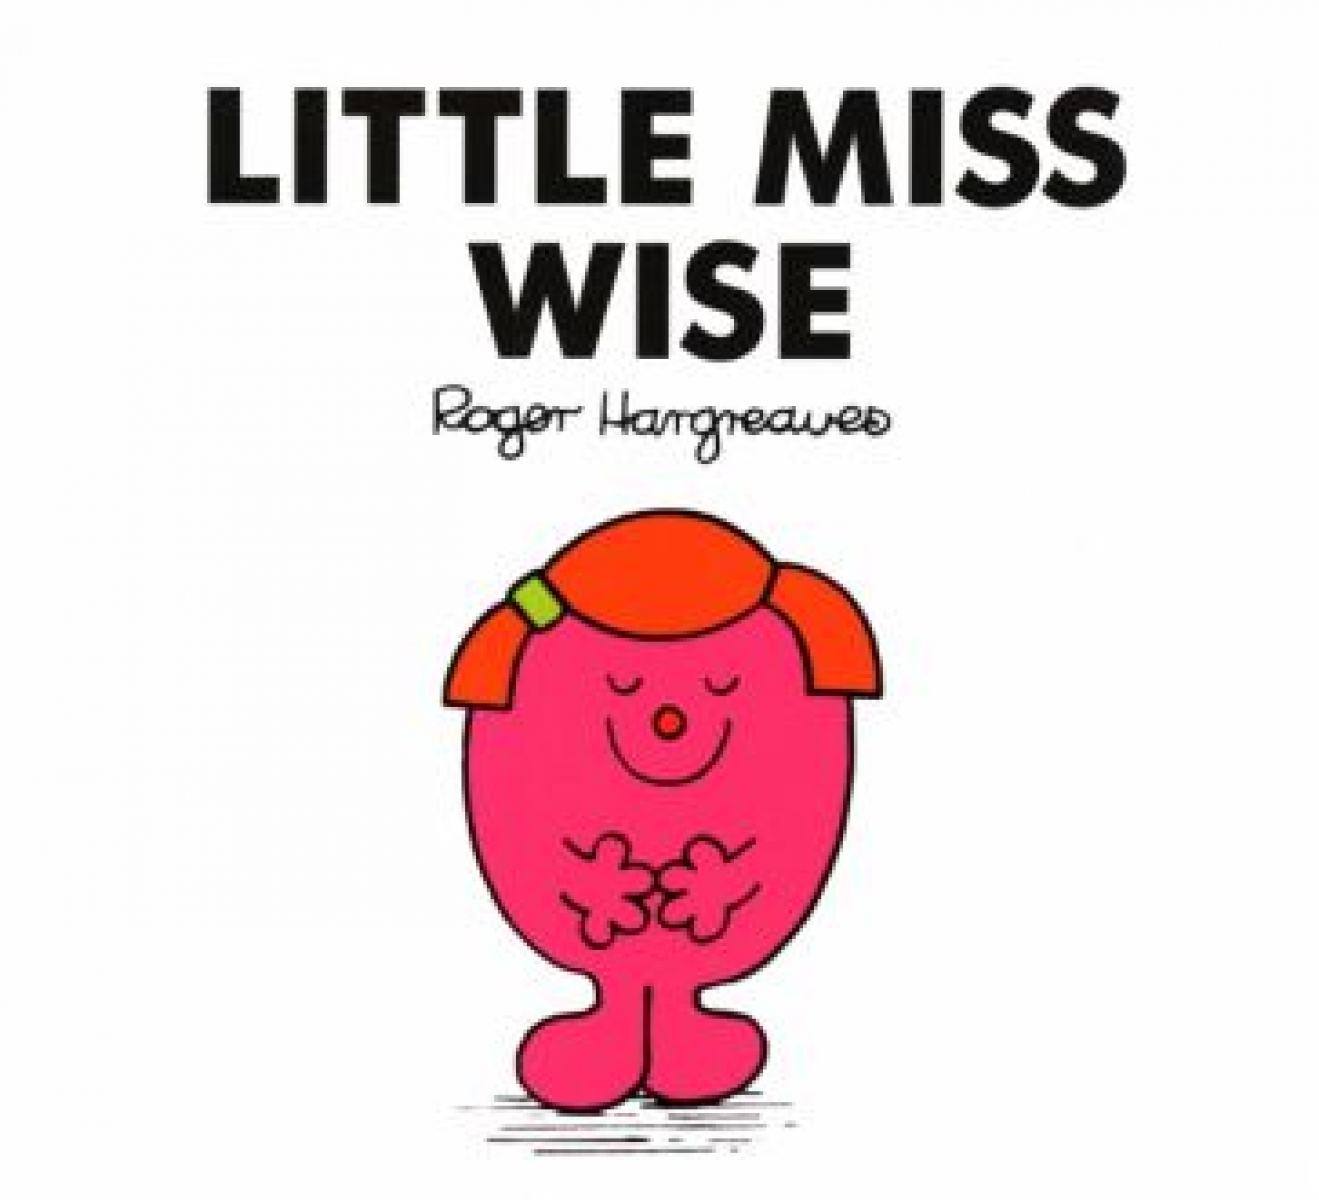 Hargreaves Roger Little Miss Wise 